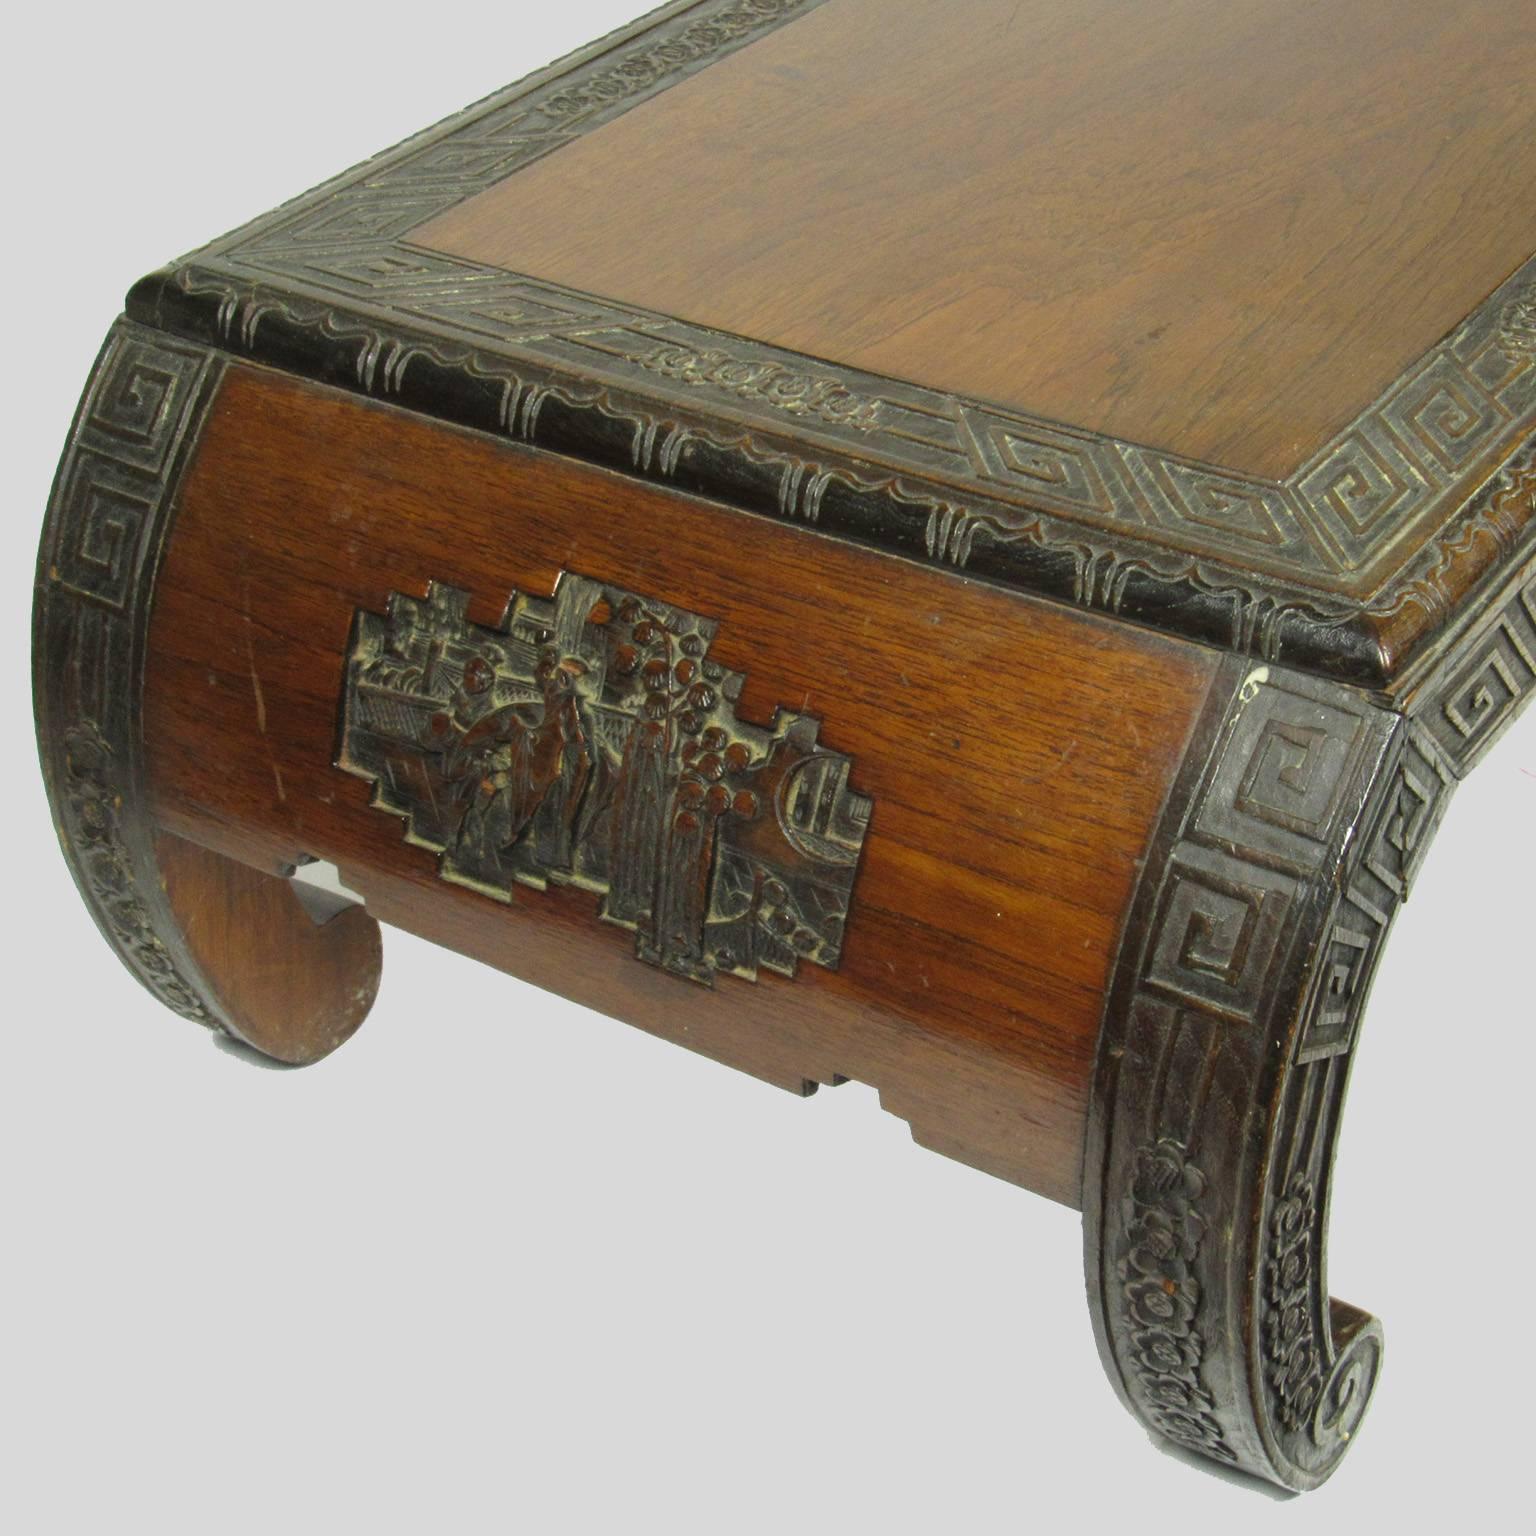 Chinese carved hardwood low table with prunus decoration, two carved figural cartouche, one on each end and scroll feet. Dimensions: 10 5/8 x 36 x 16 in.